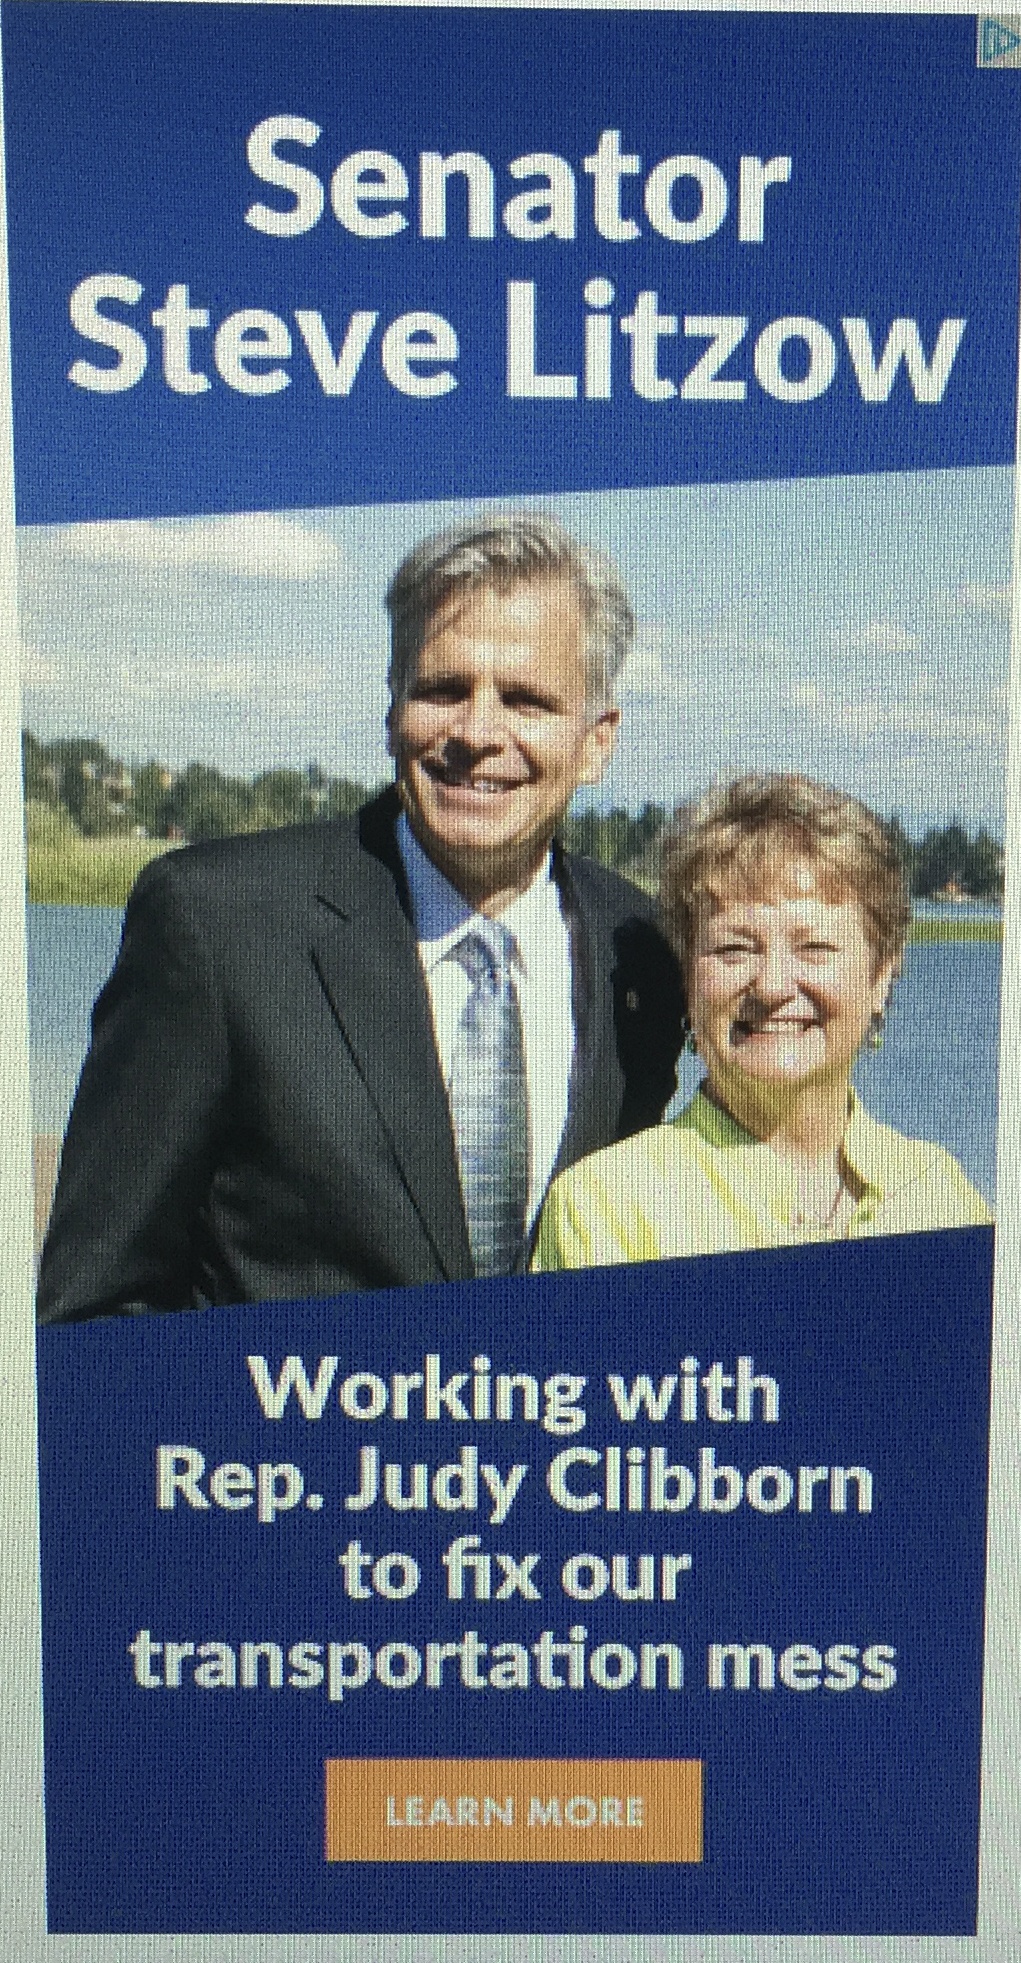 This is one of the advertisements used by the Steve Litzow campaign that implies an endorsement by Judy Clibborn